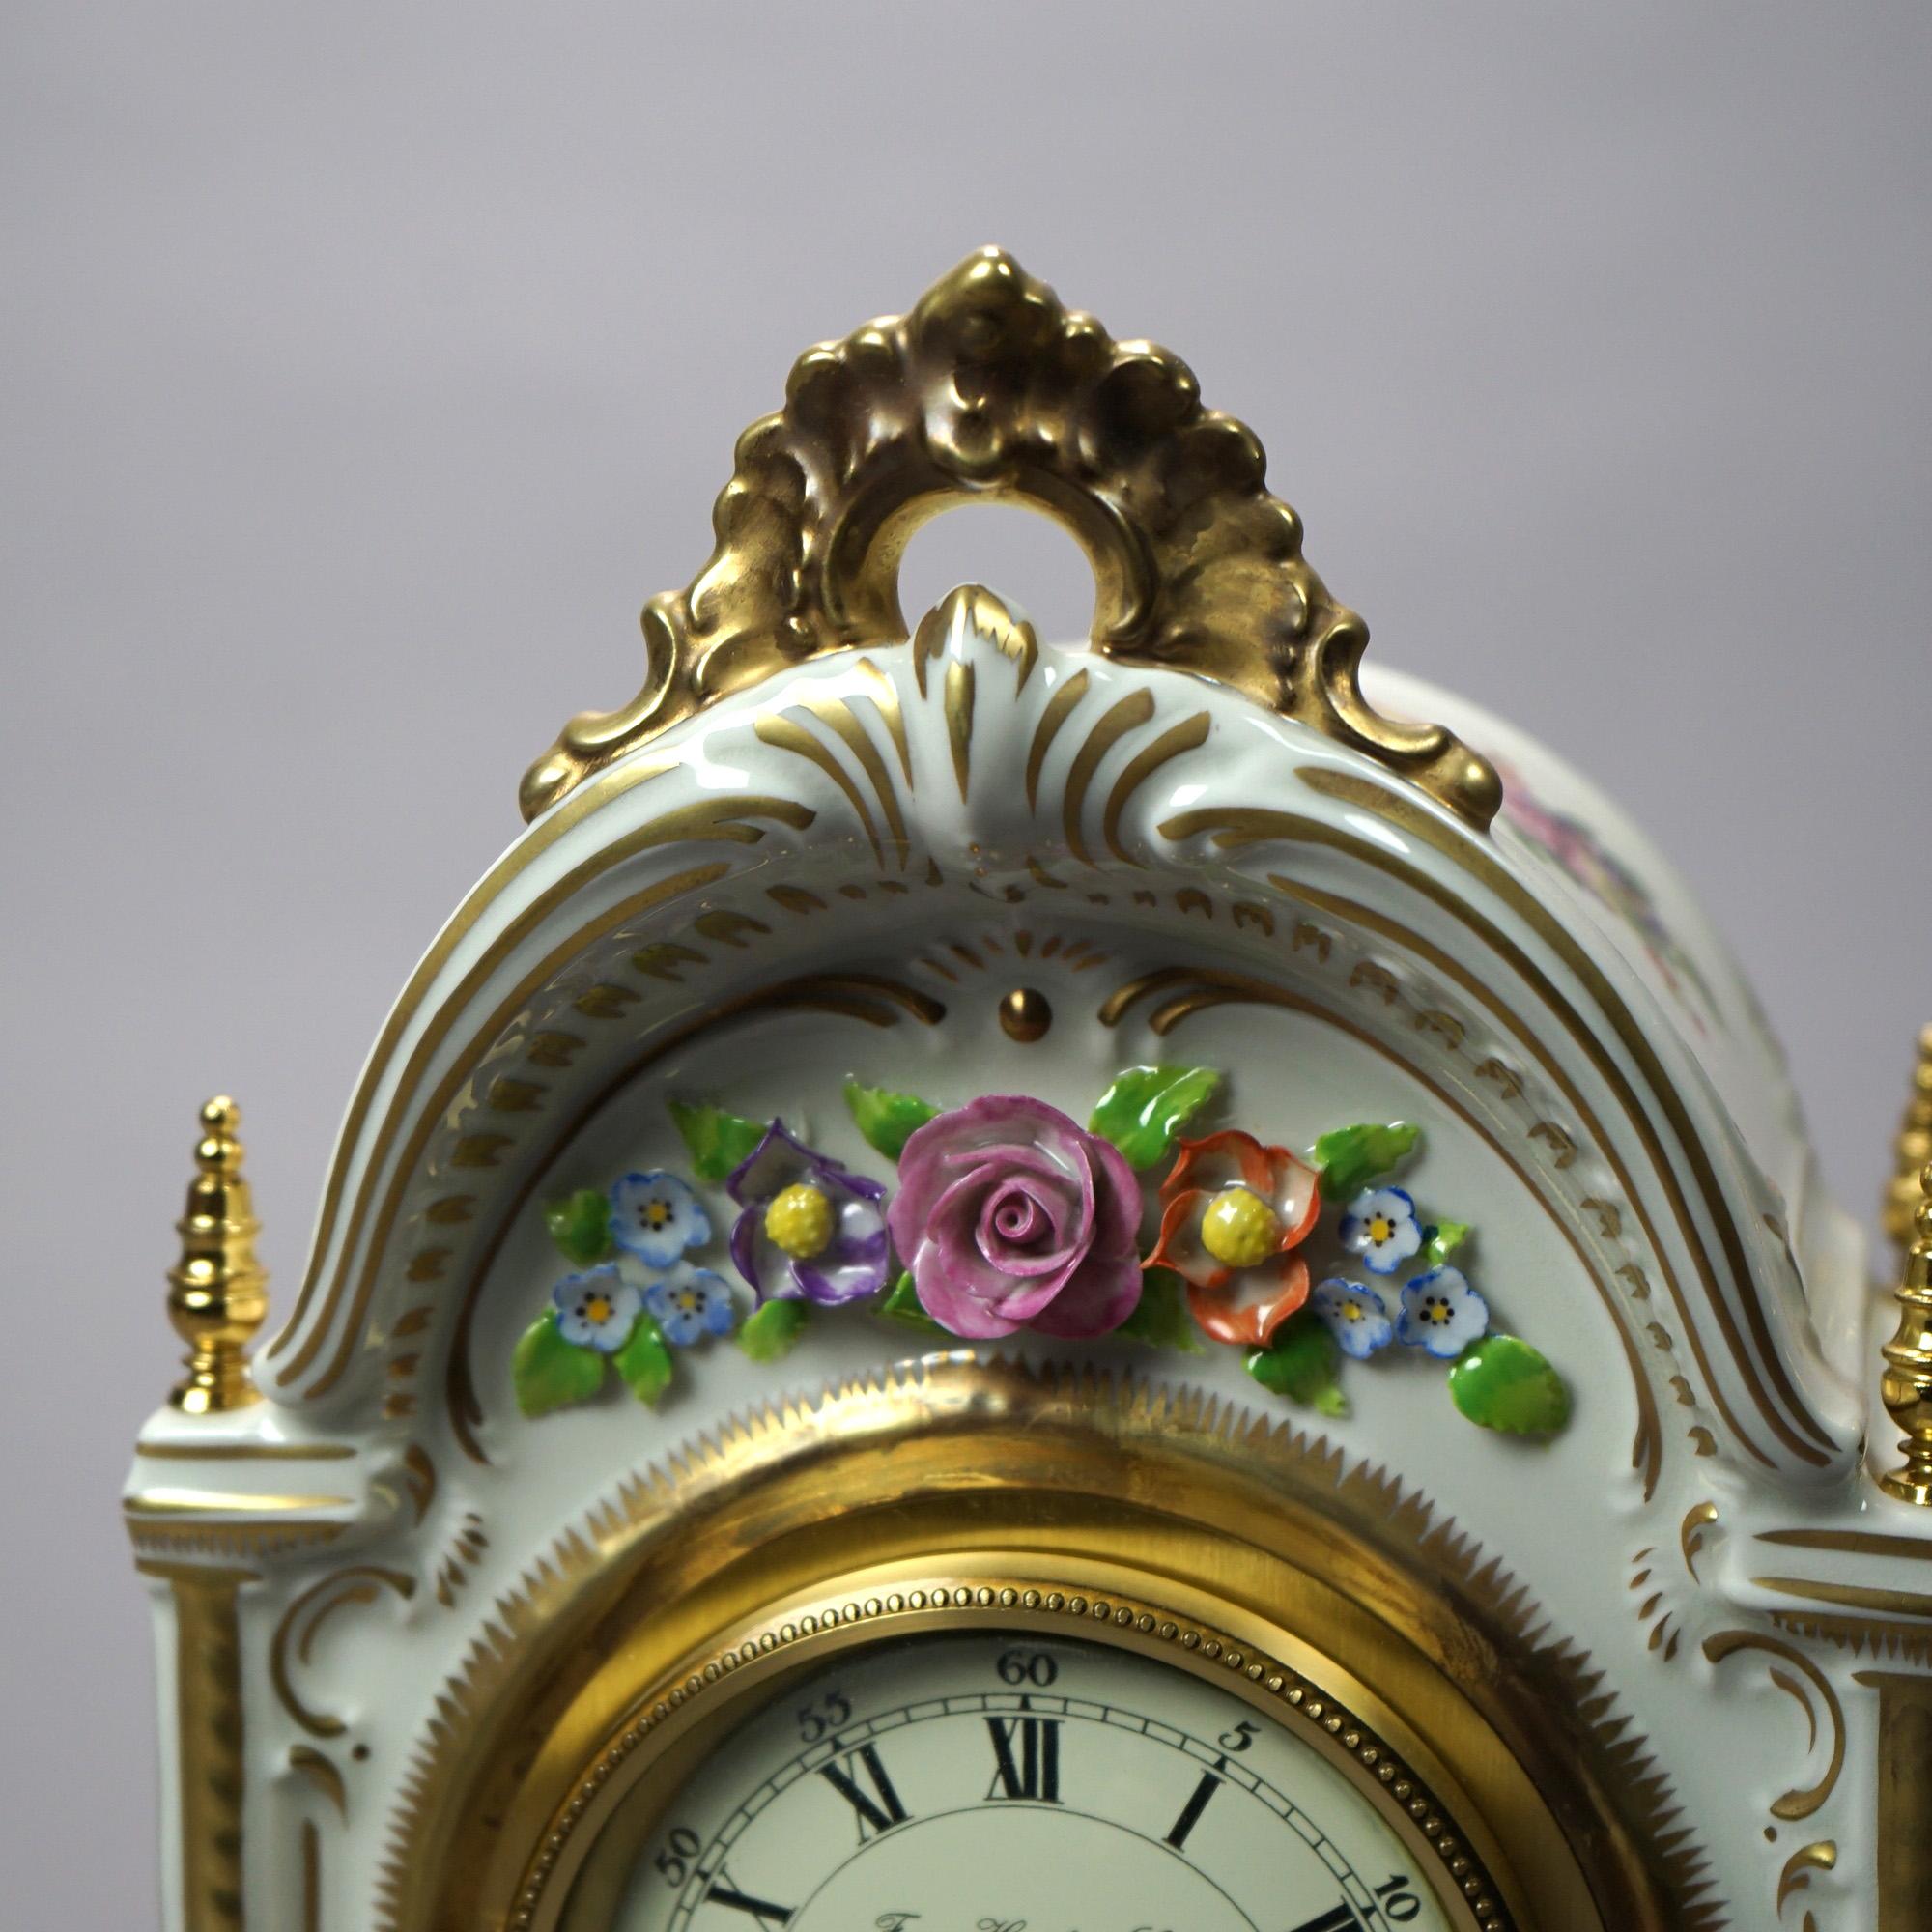 A German Franz, Hermle & John mantle clock offers porcelain construction with hand painted floral elements and gilt highlights throughout, raised on cabriole legs, maker and retailer marks on base and face, 20th century.

Measures - 12.5